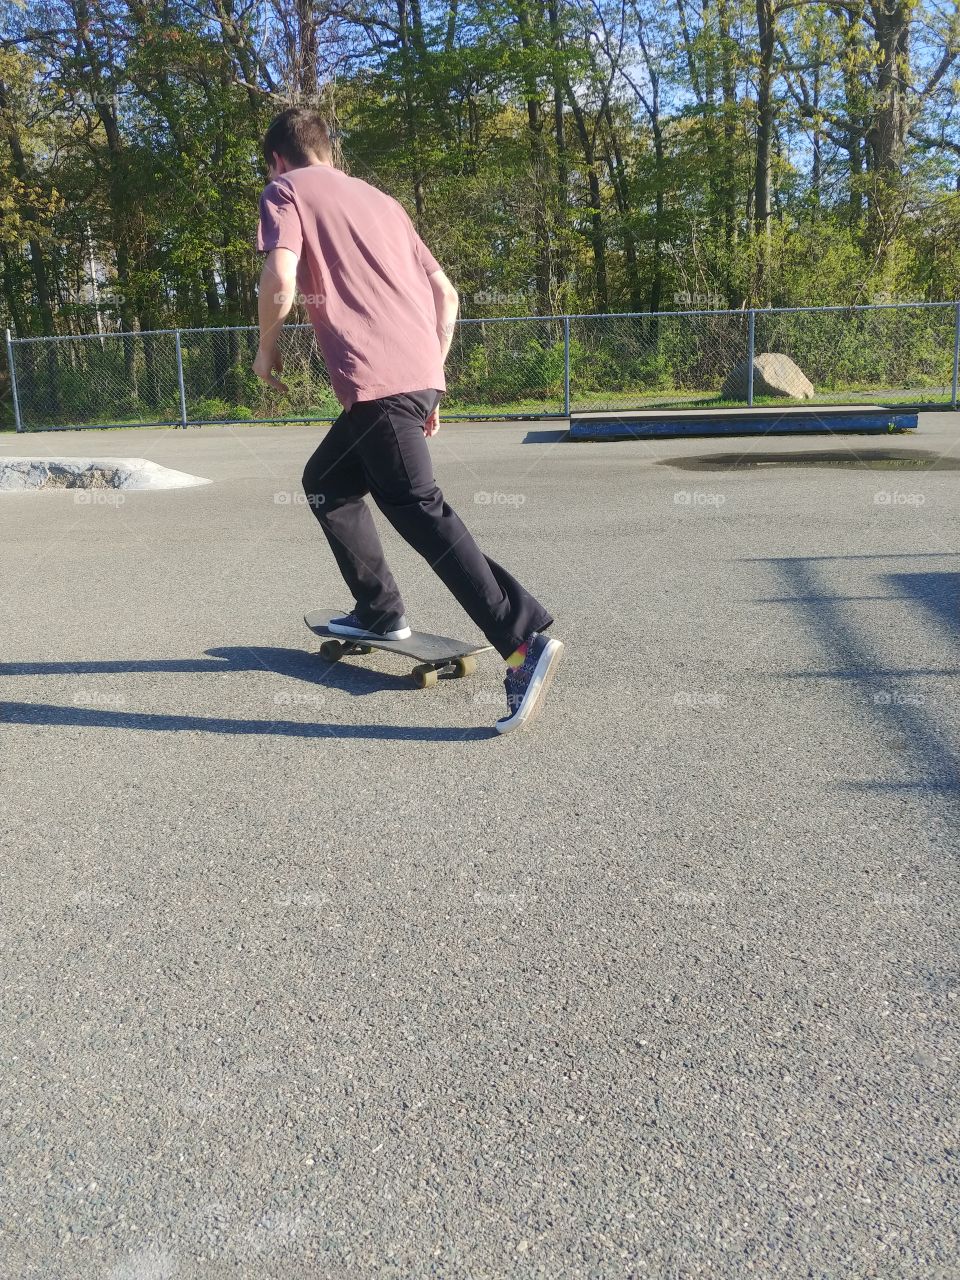 i was setting up for my next trick at the skatepark.